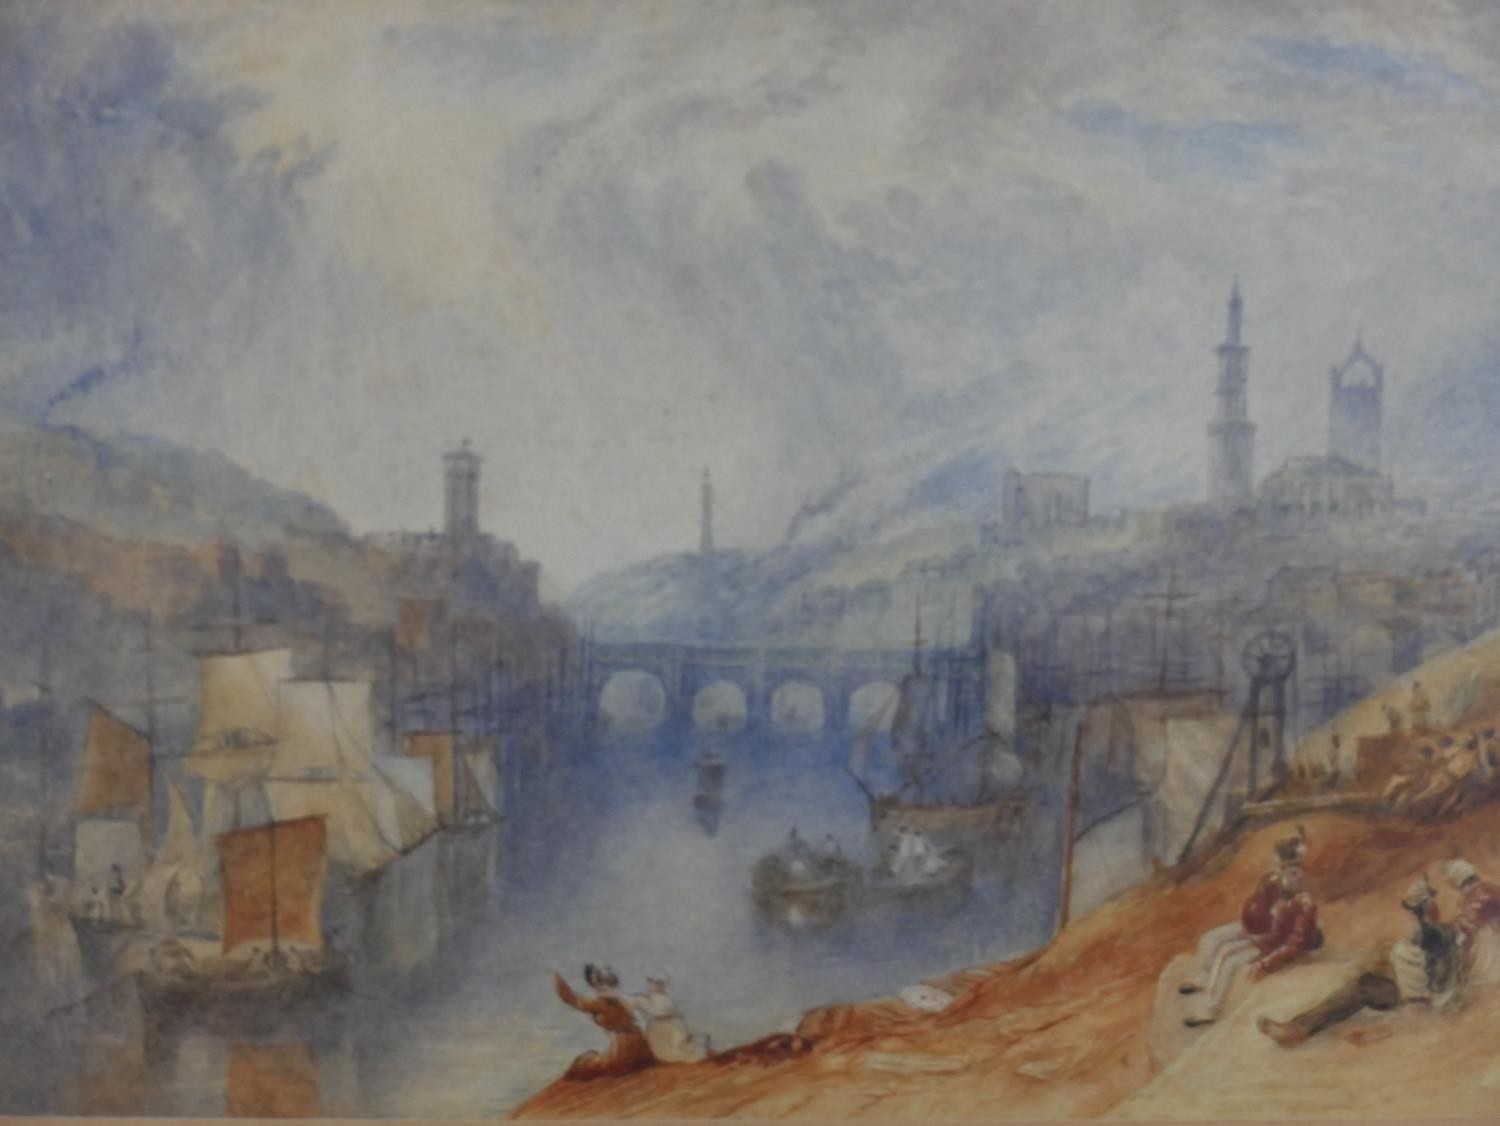 After Joseph Mallord William Turner, Newcastle upon Tyne, watercolour on paper, unsigned. H.33 W.